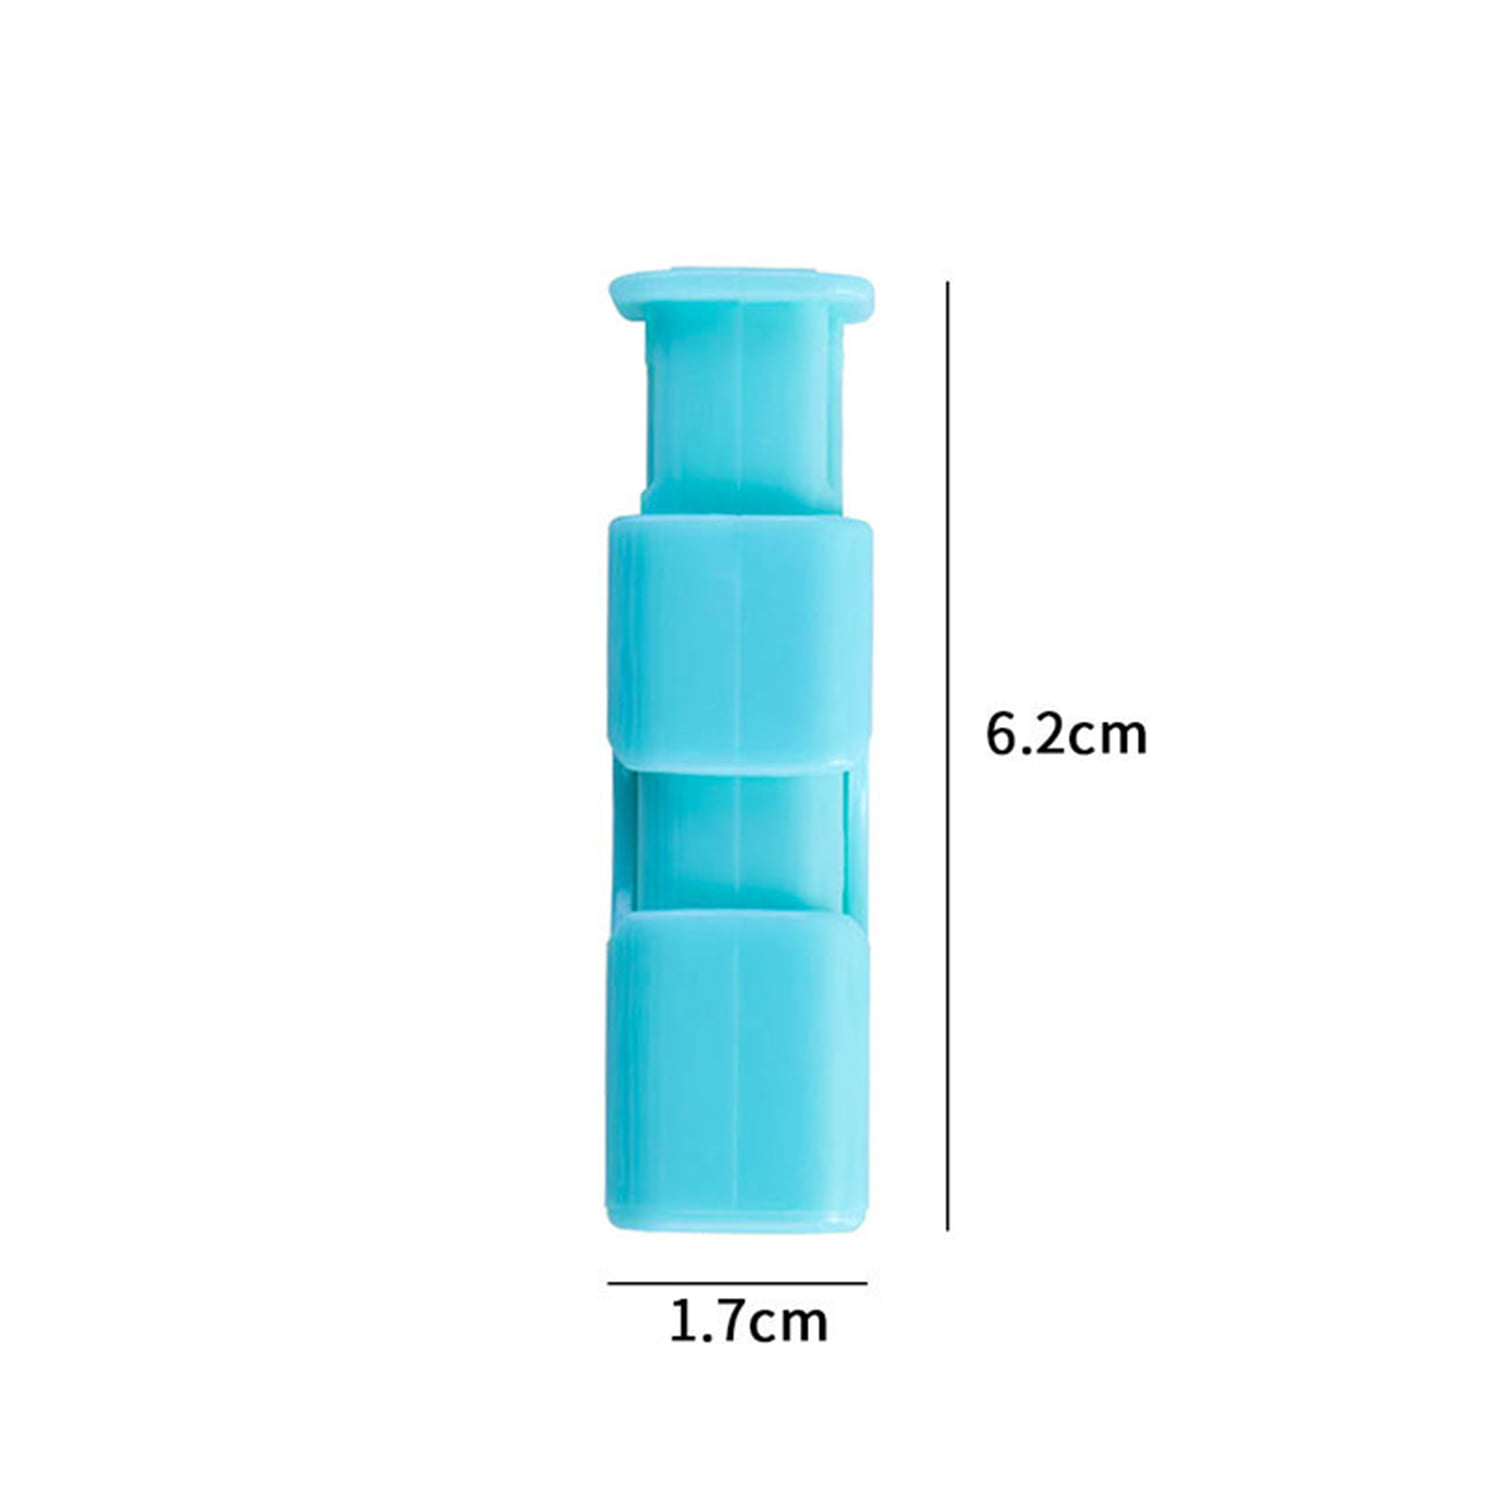 4pcs Food bag clipswith Pour Spouts, Great Clips Bags for Kitchen, Suitable  for Small Particle Food, Liquid,Flour and Baby Food Storage Organizer